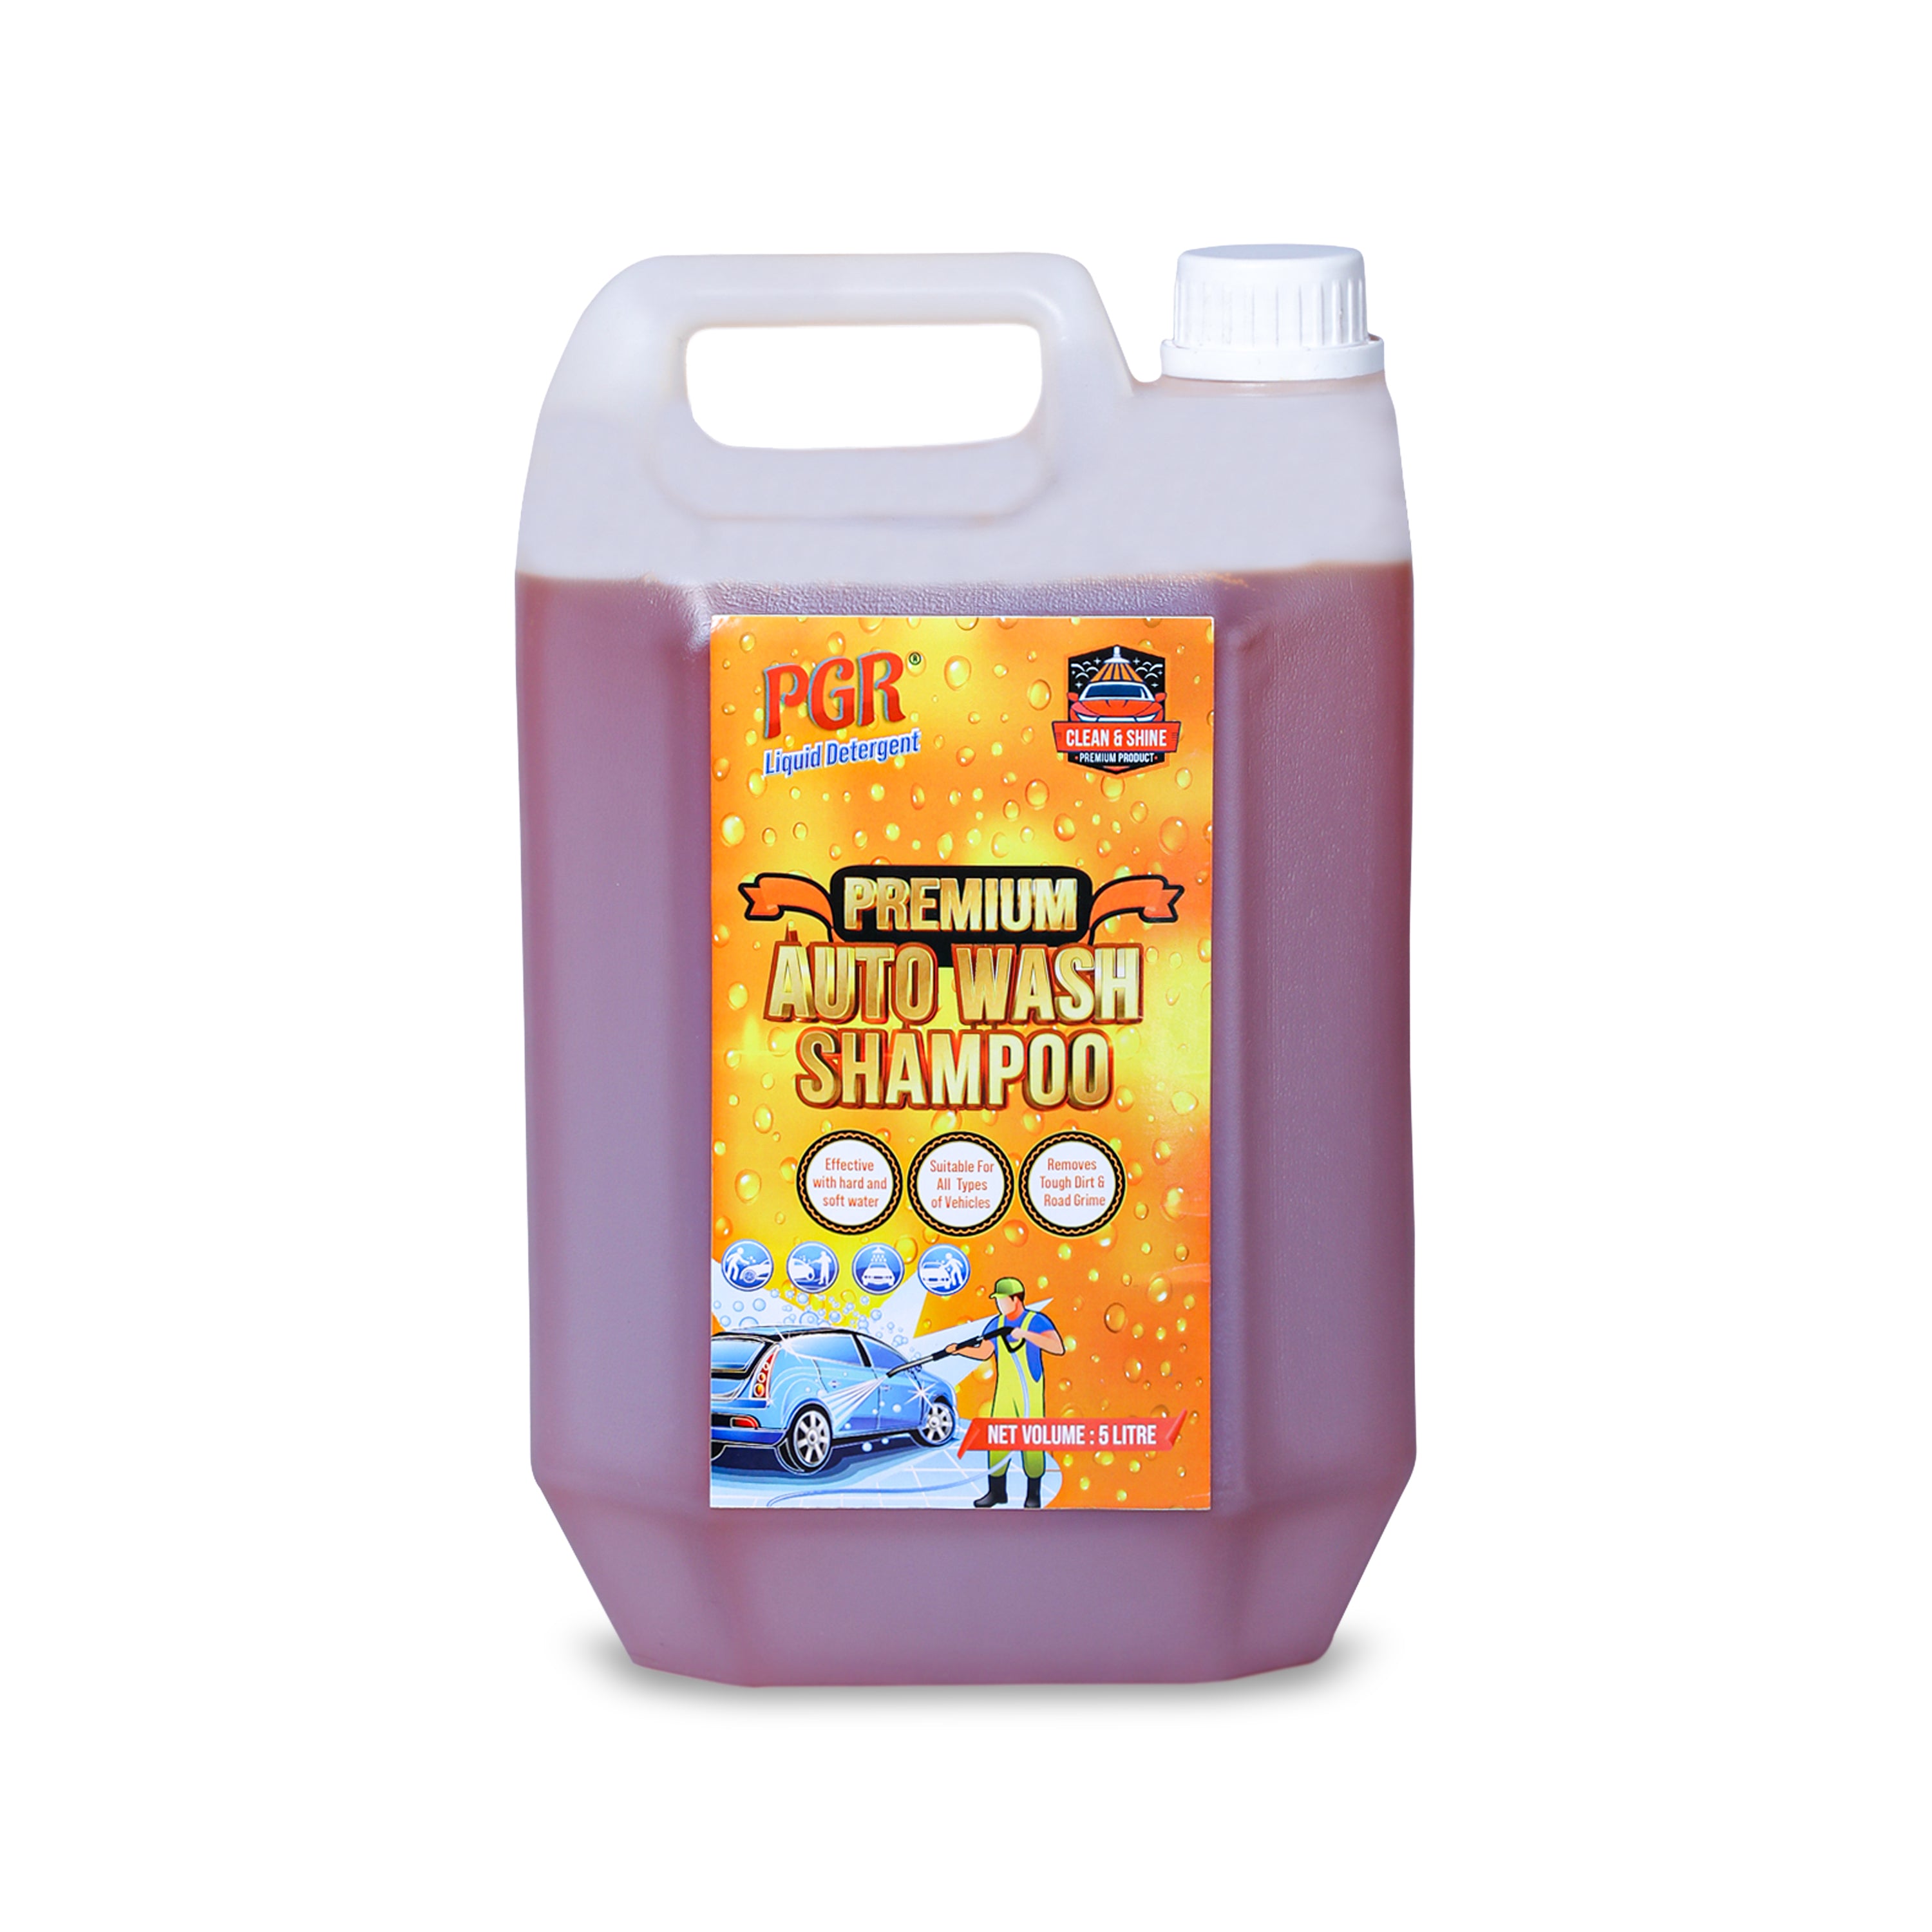 PGR Disinfectant Surface & Floor Cleaner Liquid, Floral Fragrance - 5  Litre, Suitable for All Floors and Cleaner Mops, Anti Bacterial Formulation